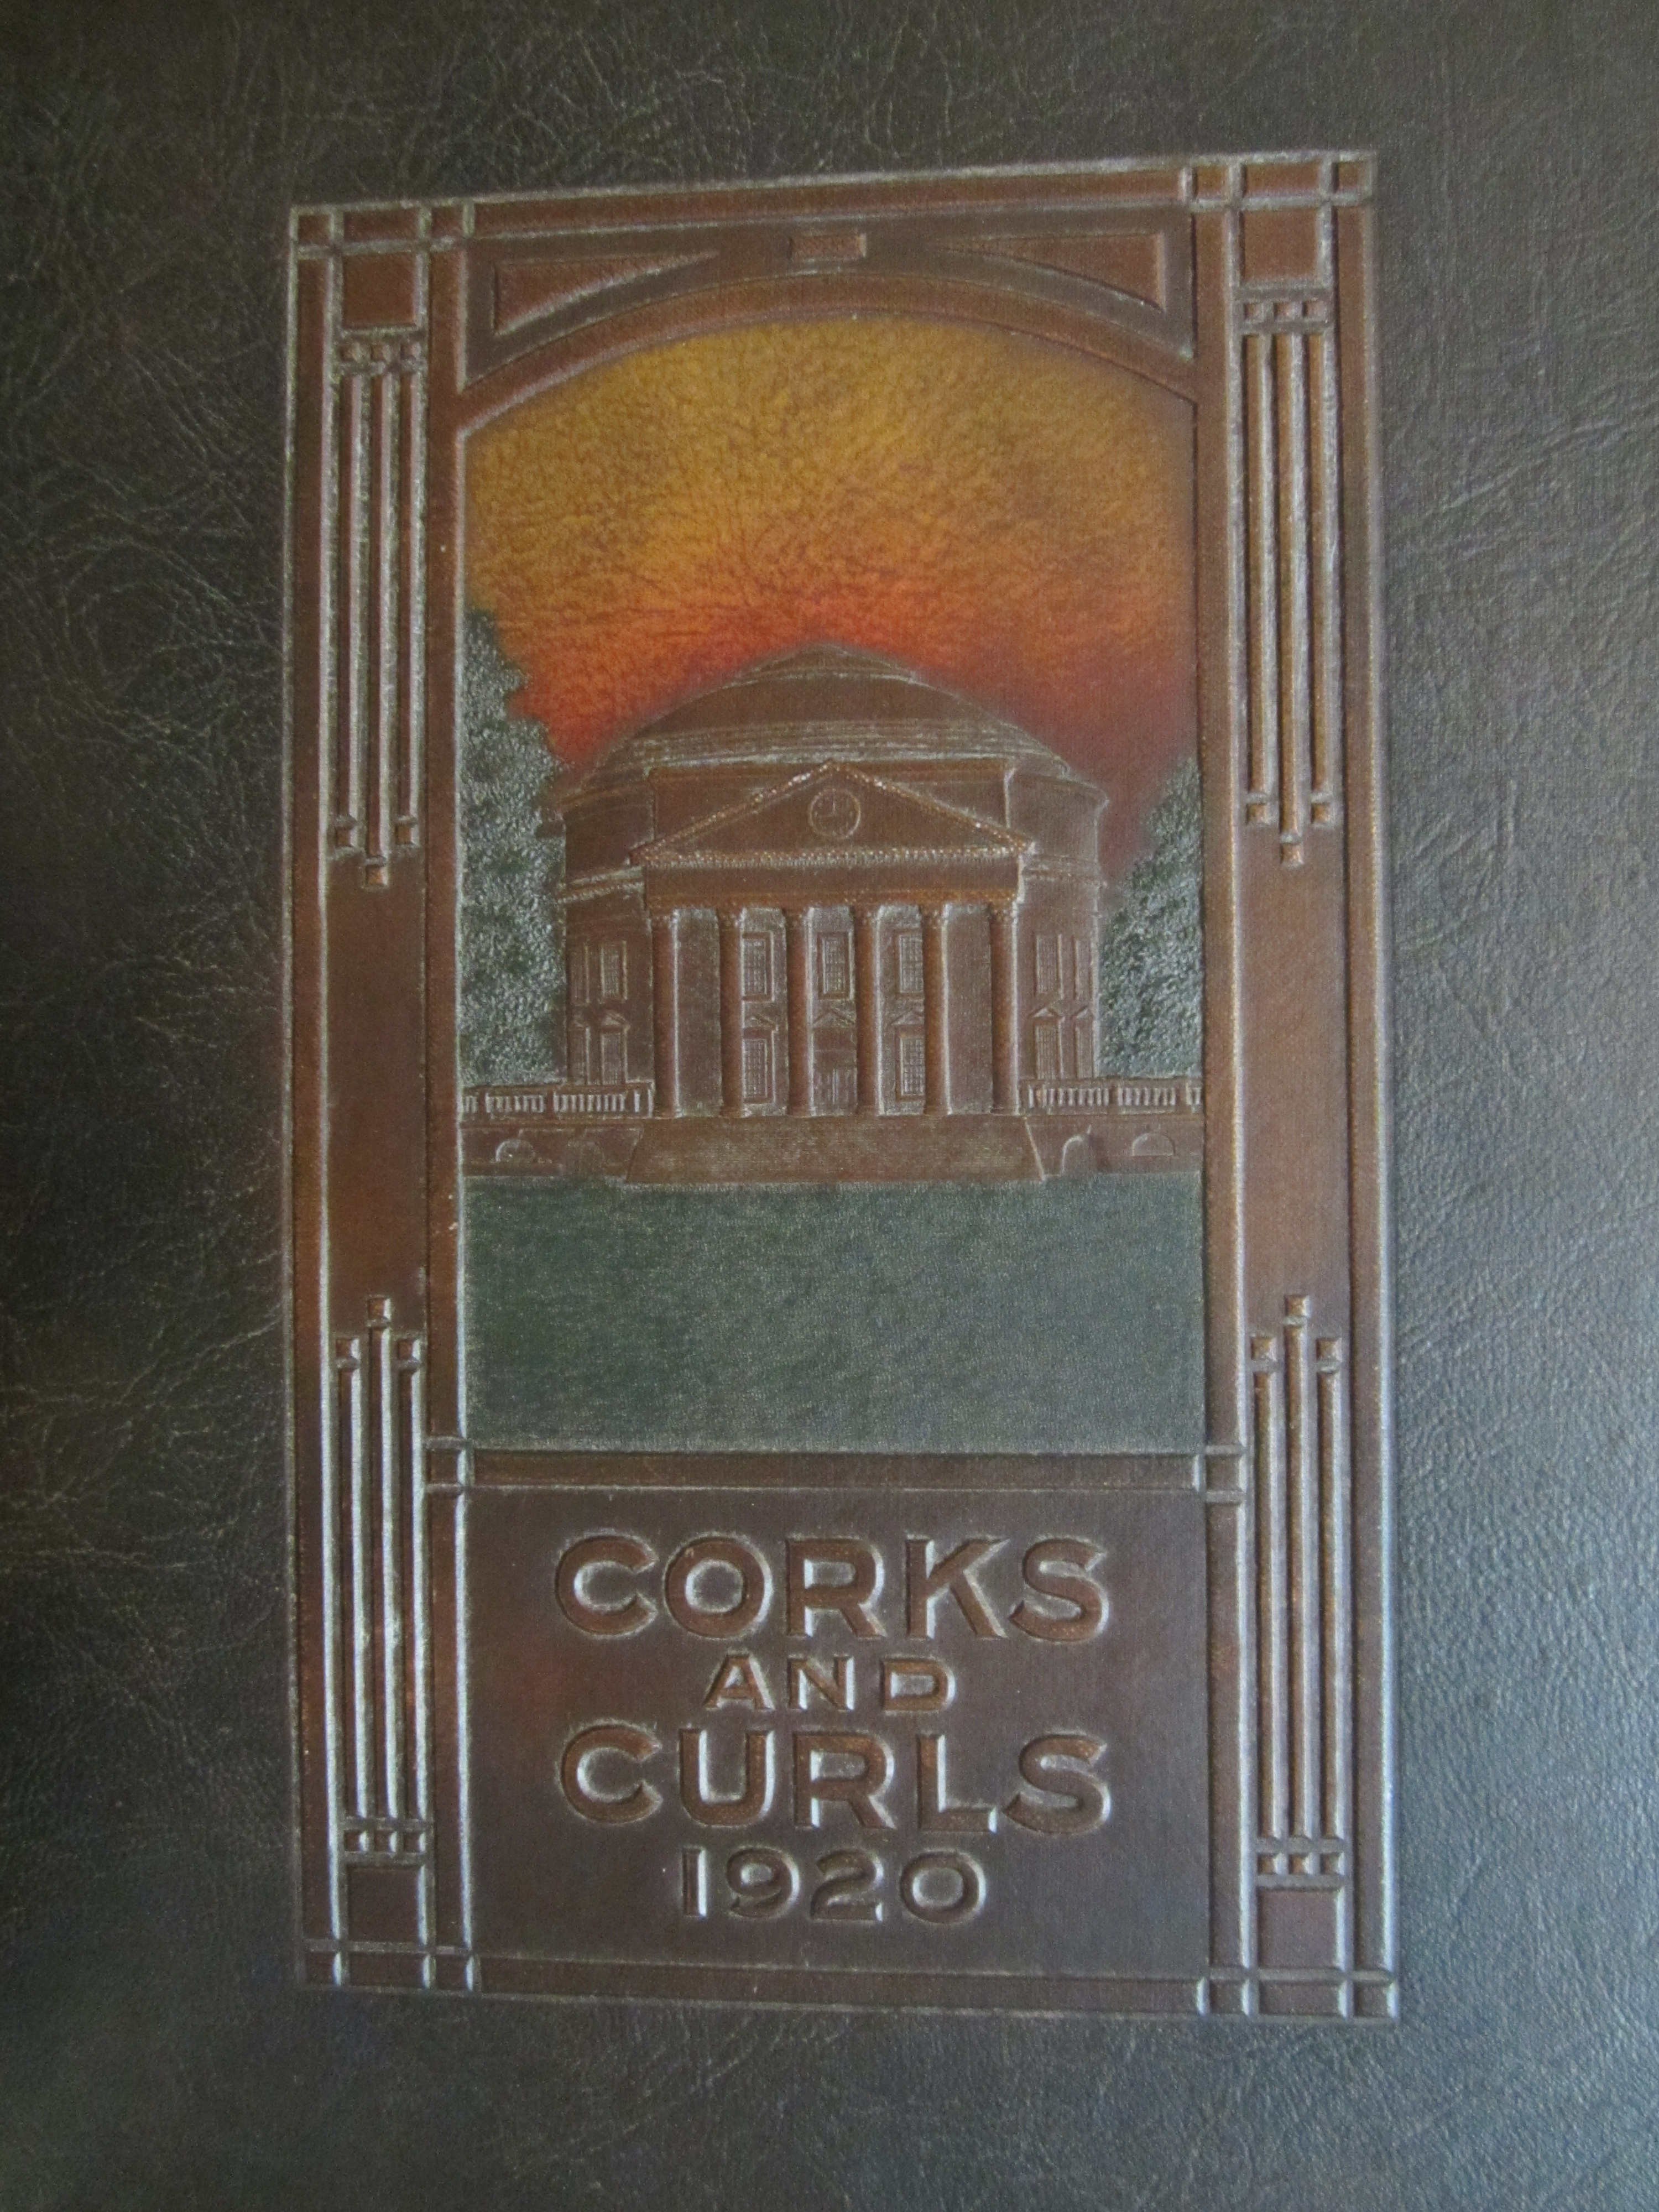 Cover of Corks and Curls, 1920. (Photograph by Donna Stapley)